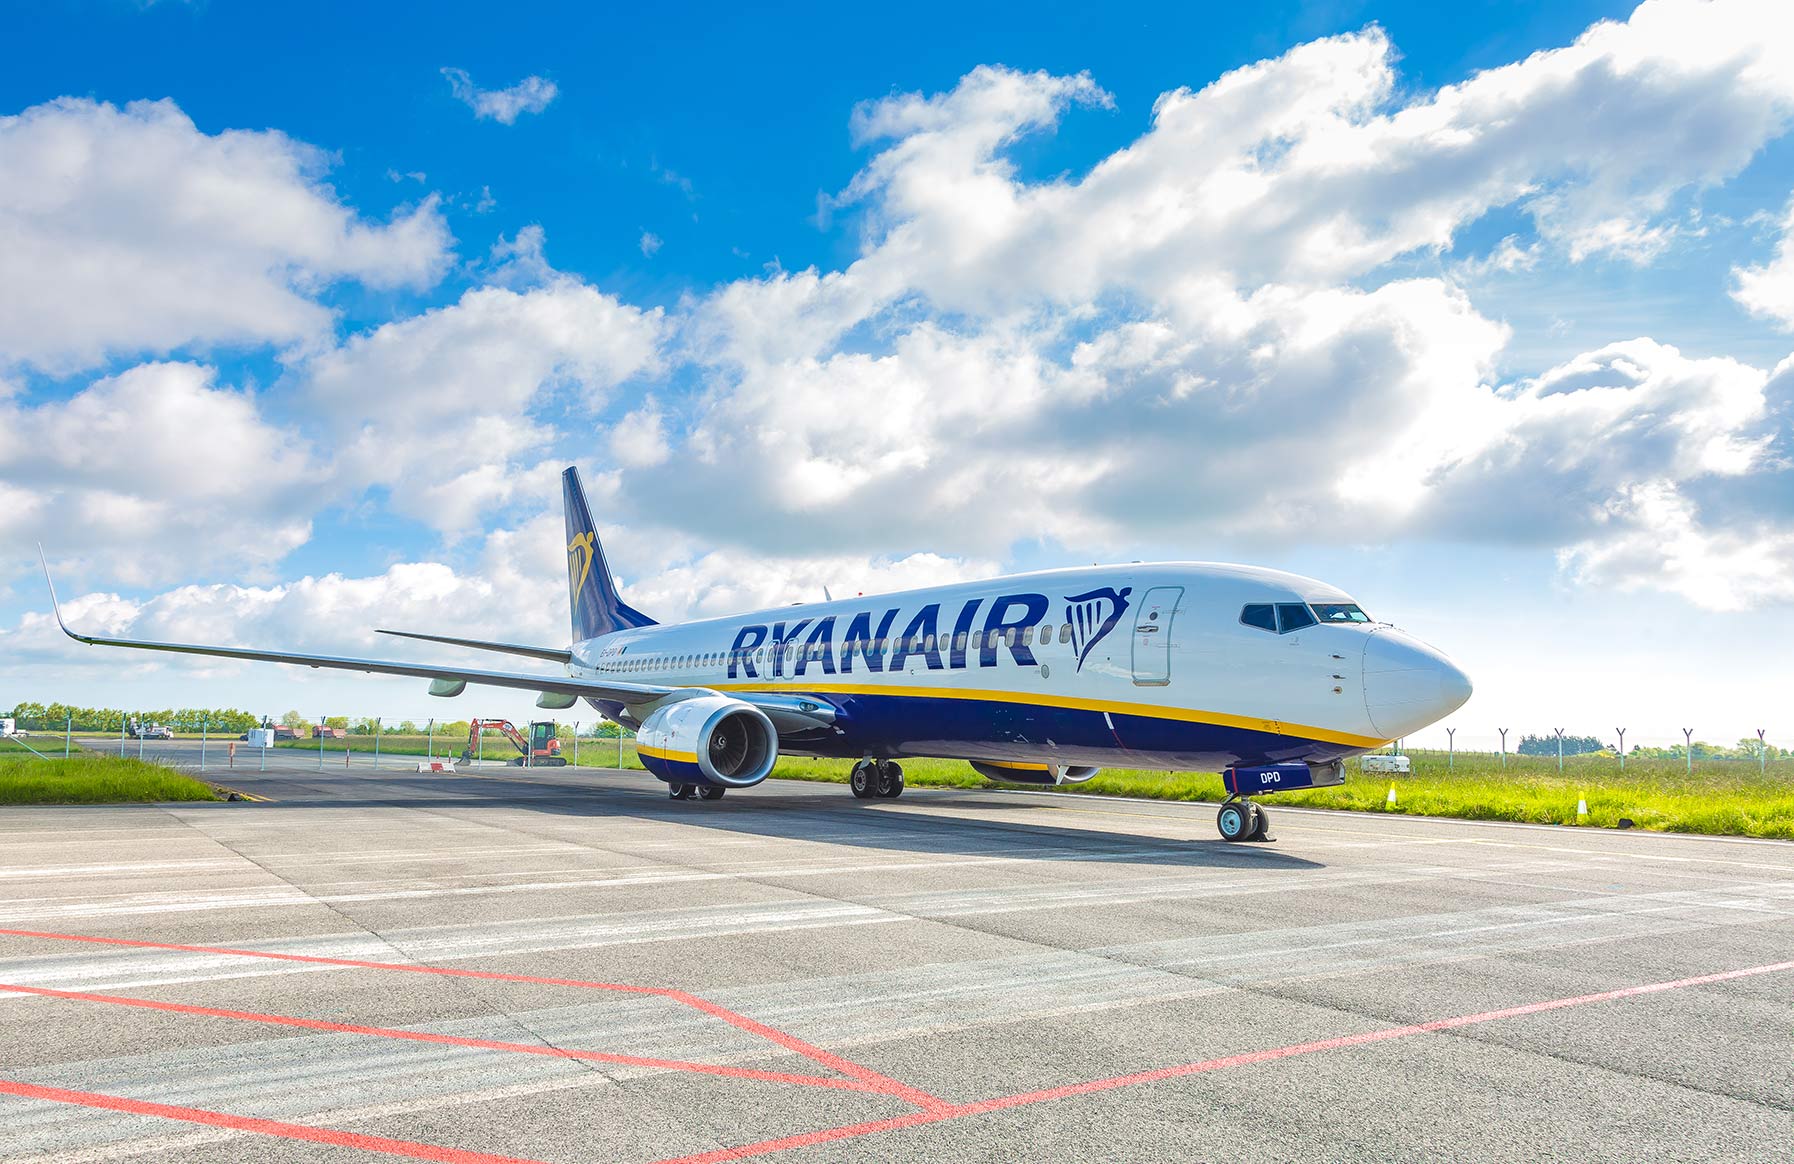 Ryanair Air Baltic With New Base In Riga, 16 New Routes - Live and Let's Fly